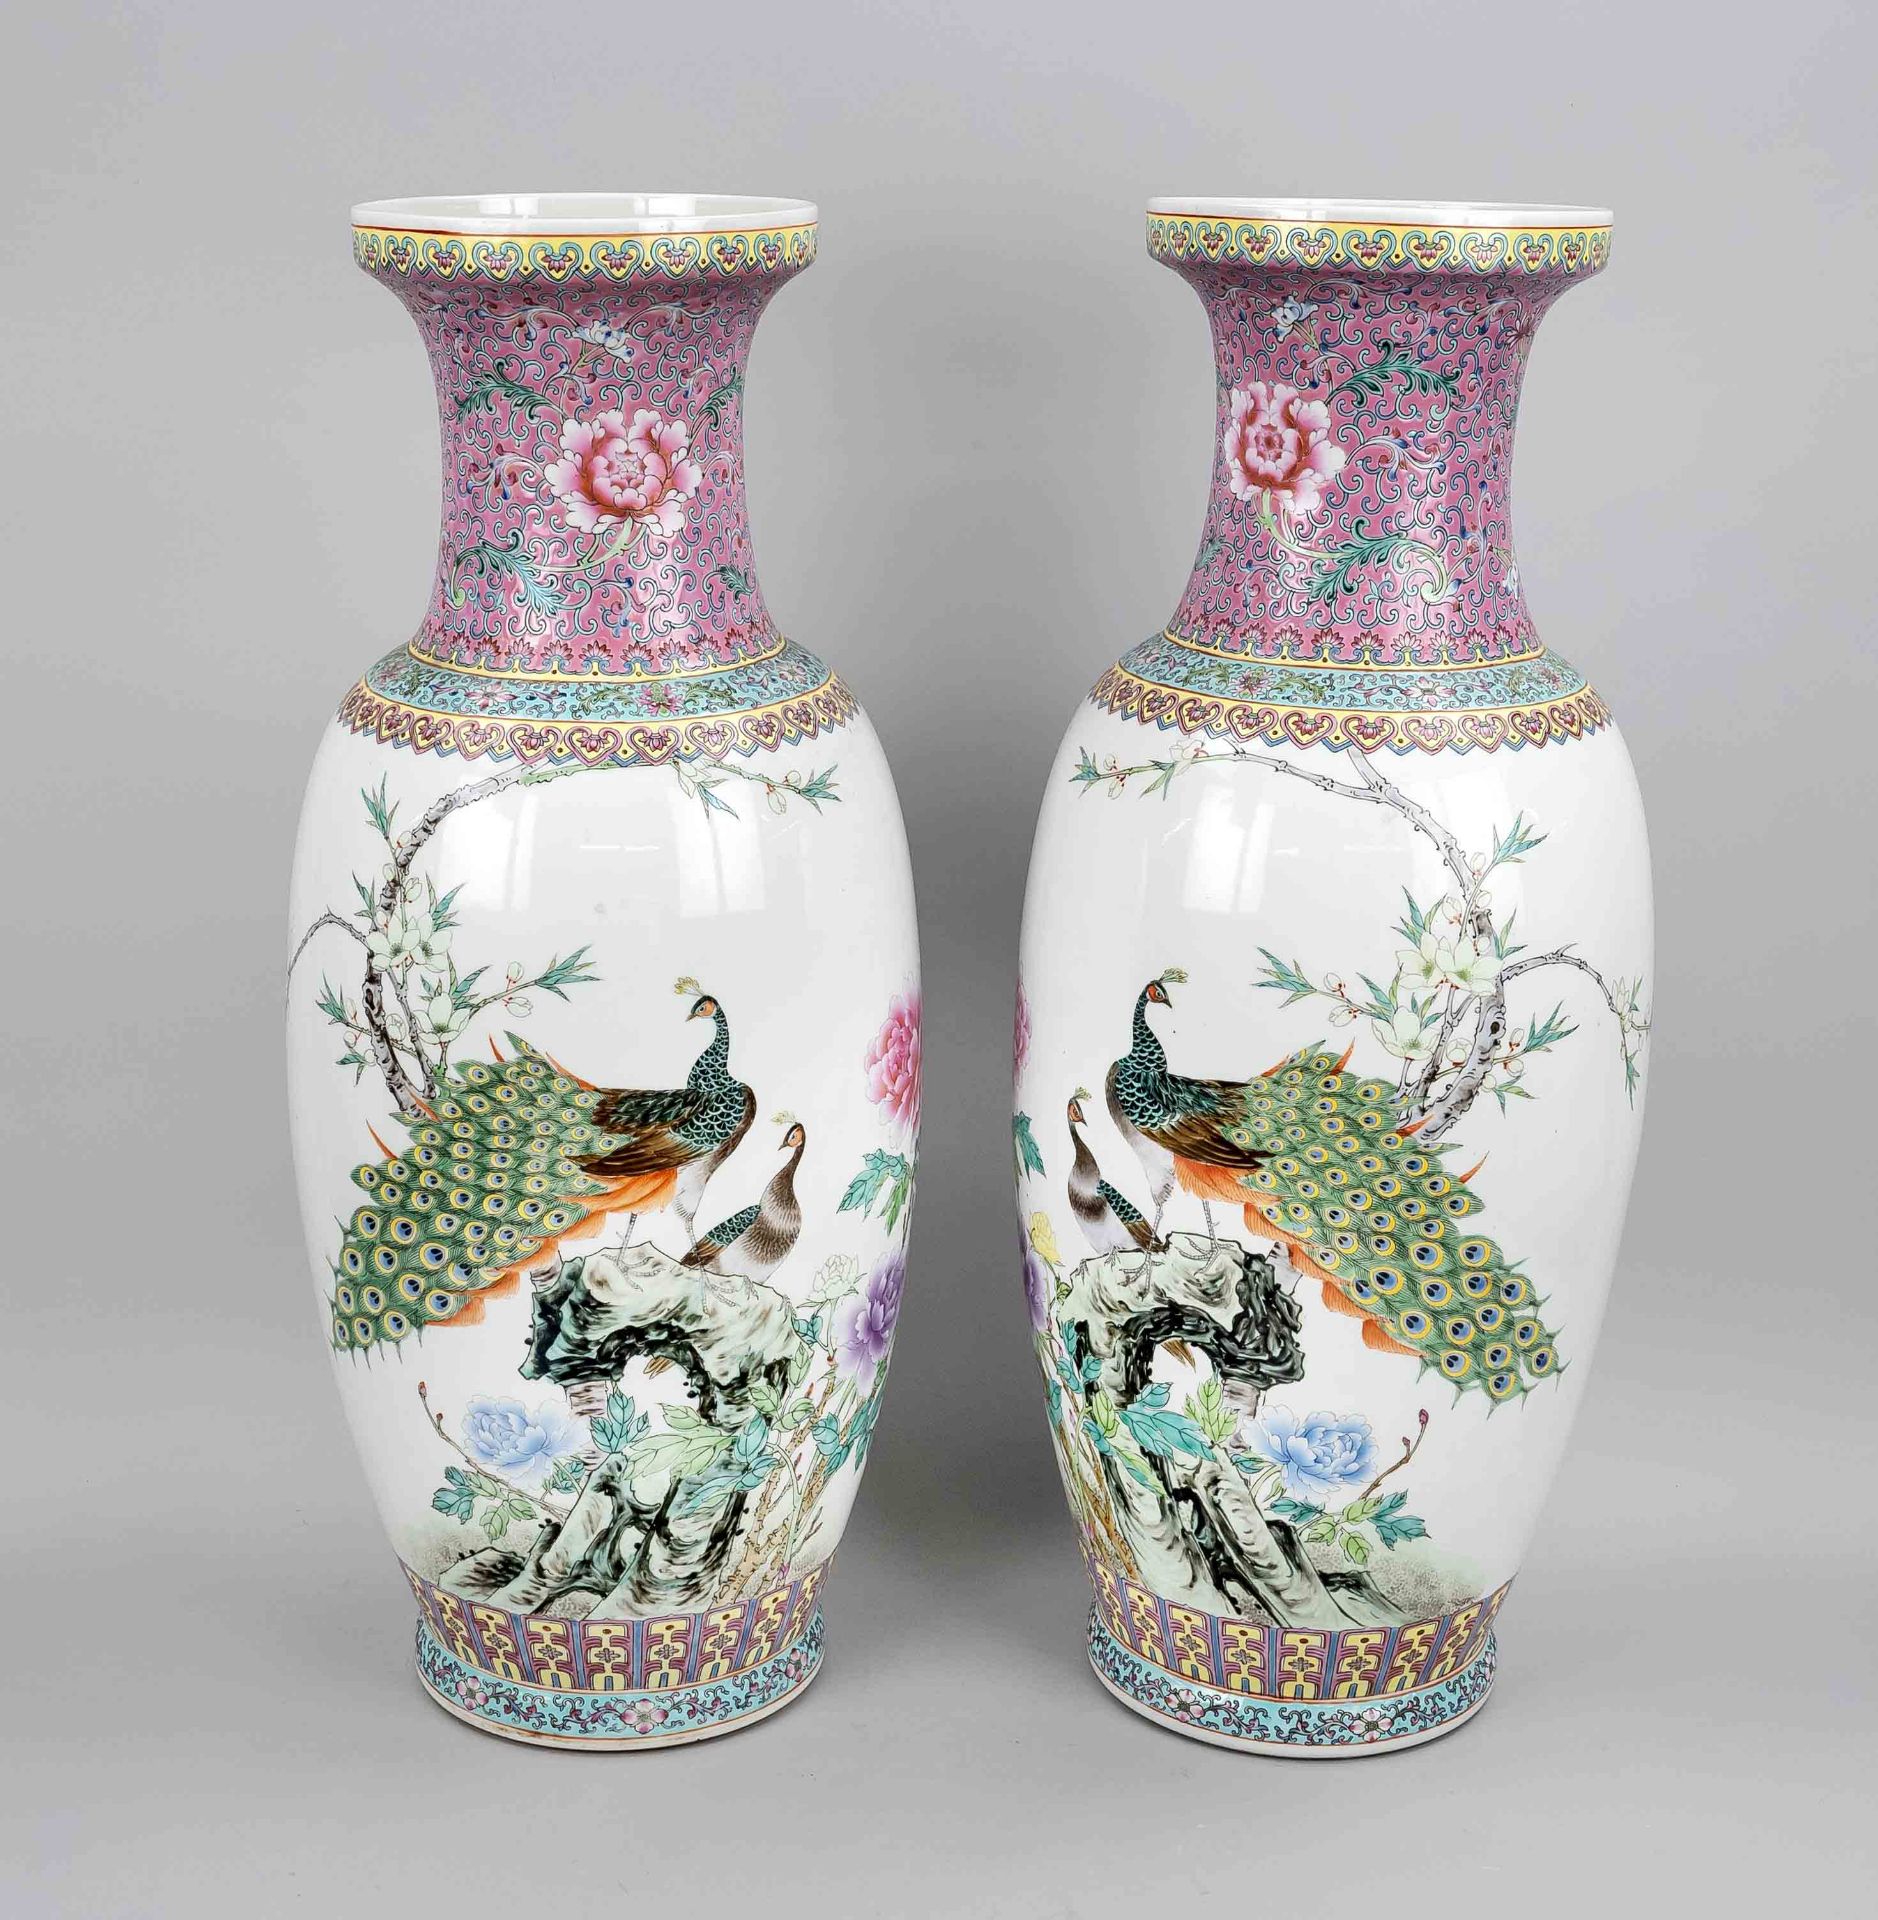 Pair of palace vases famille rose, China, Jingdezhen, 20th c., porcelain with polychrome enamel